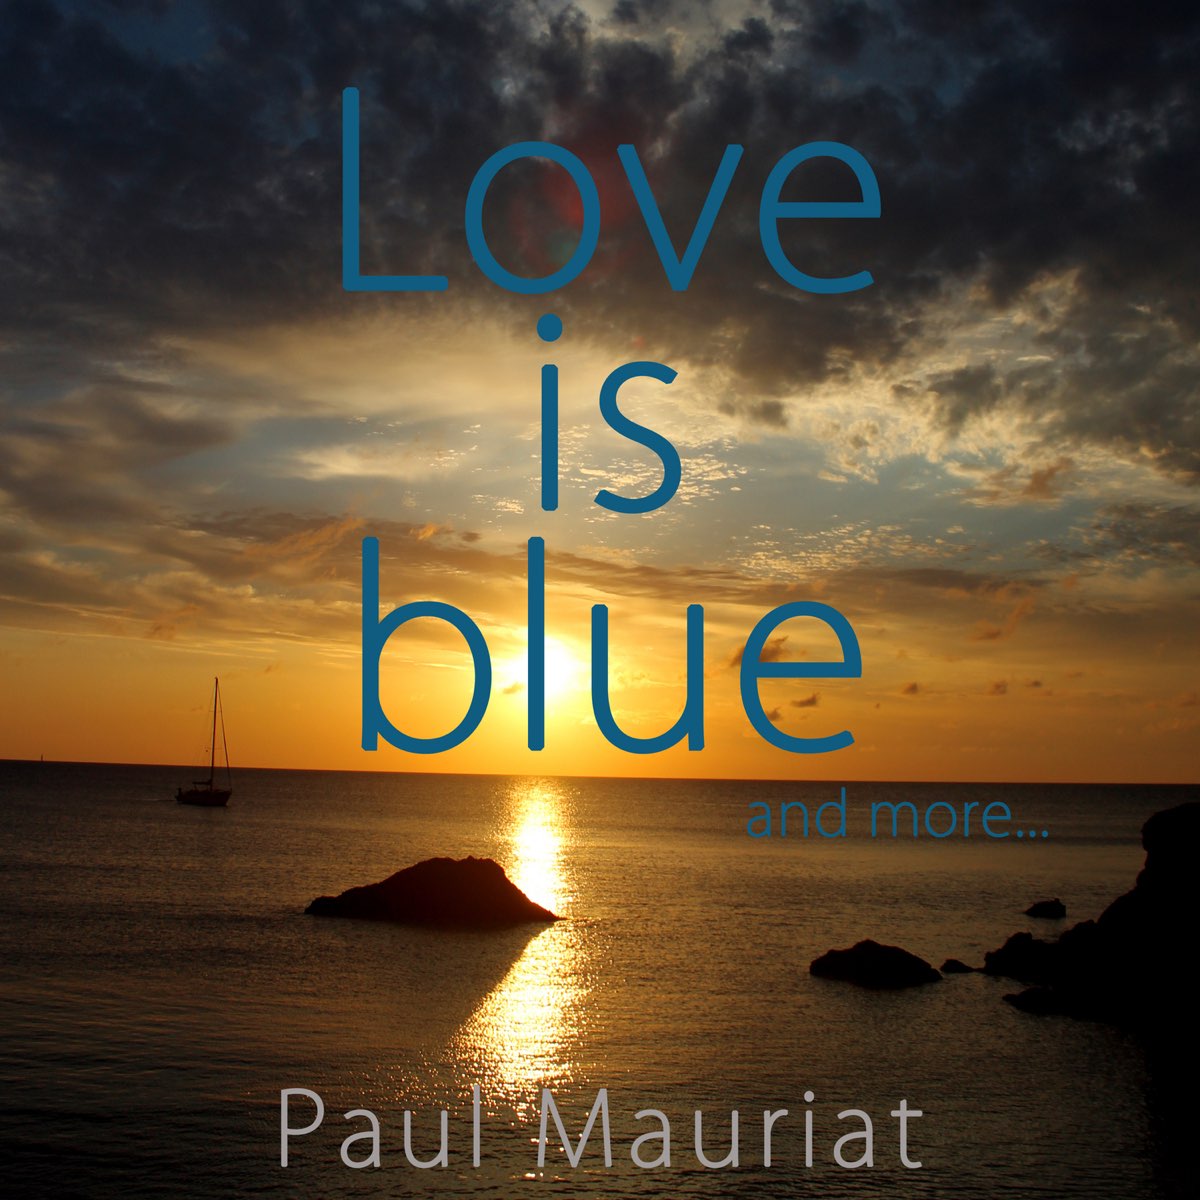 Love Is Blue And More By Paul Mauriat On Apple Music